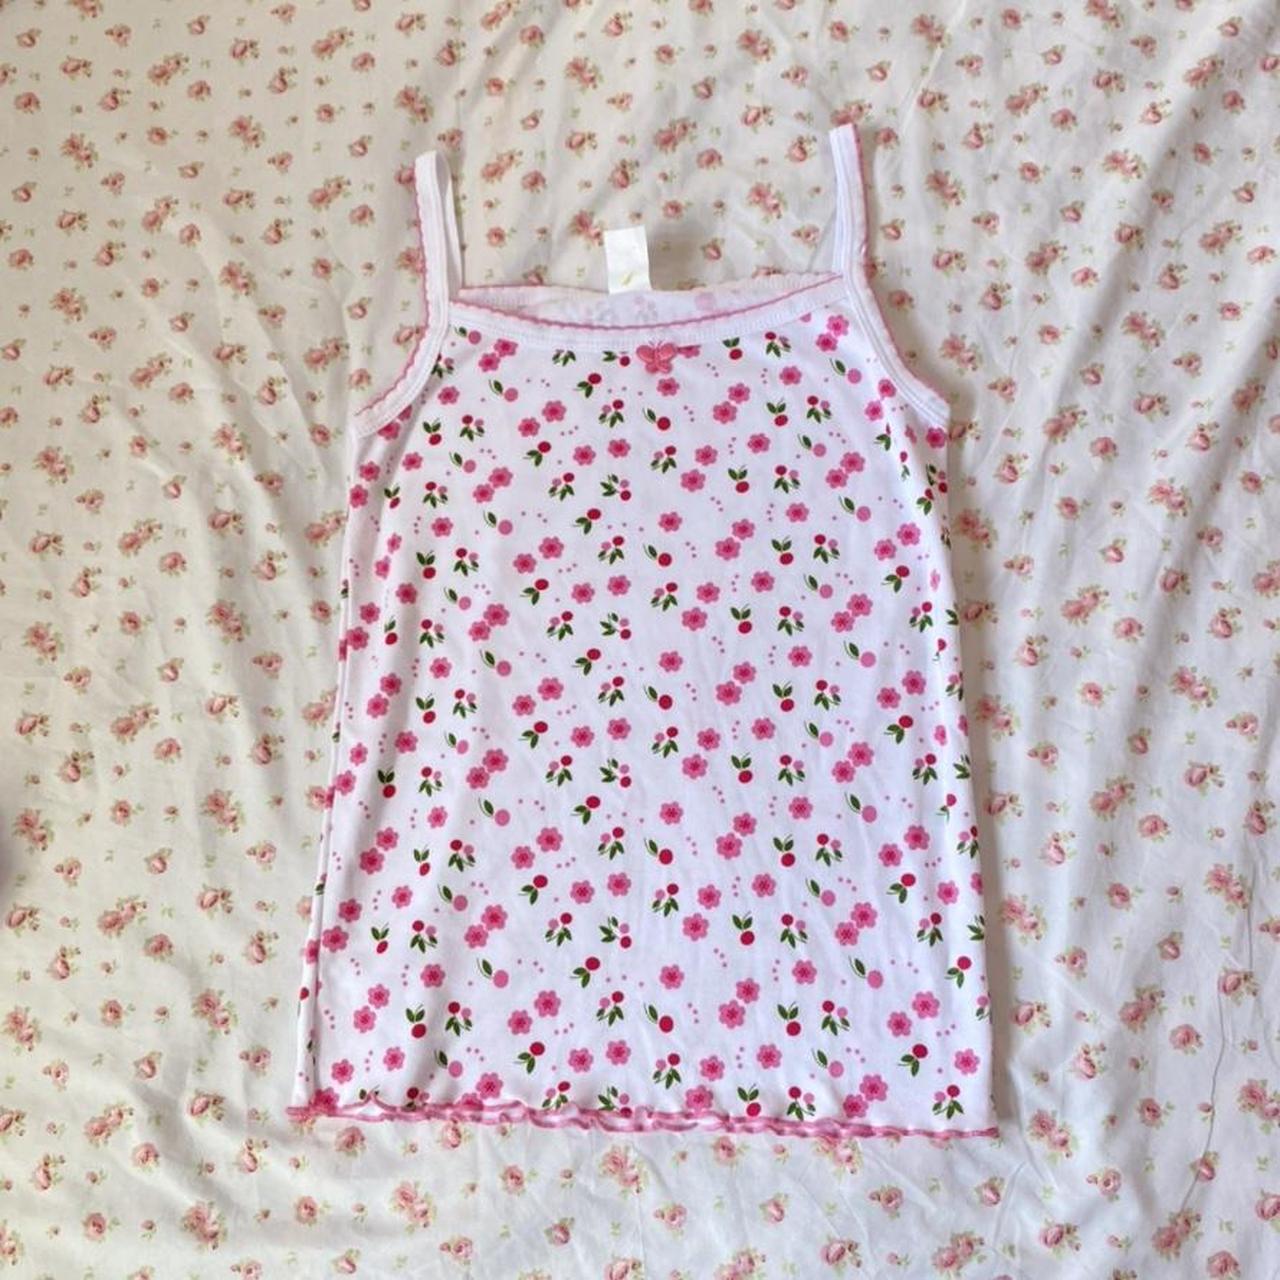 Adorable Floral Cami 🌸 Has a butterfly in the... - Depop